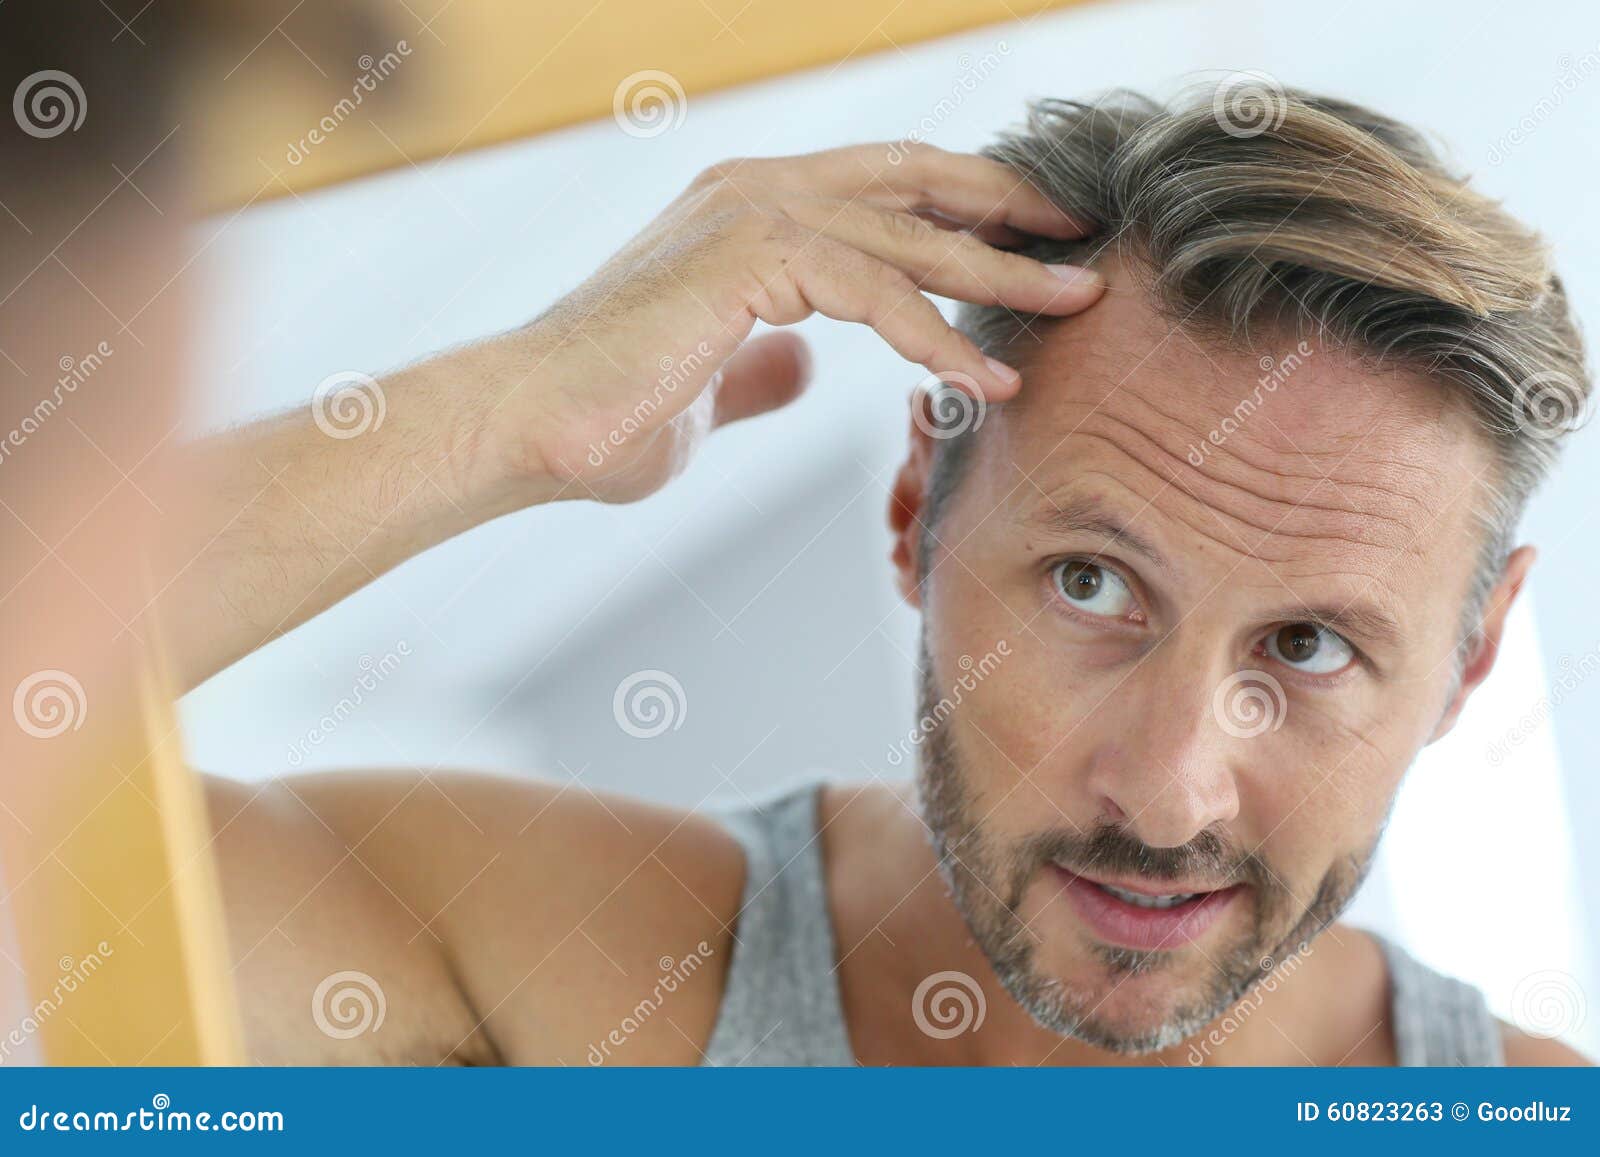 mirror portrait of man concerned by hair loss